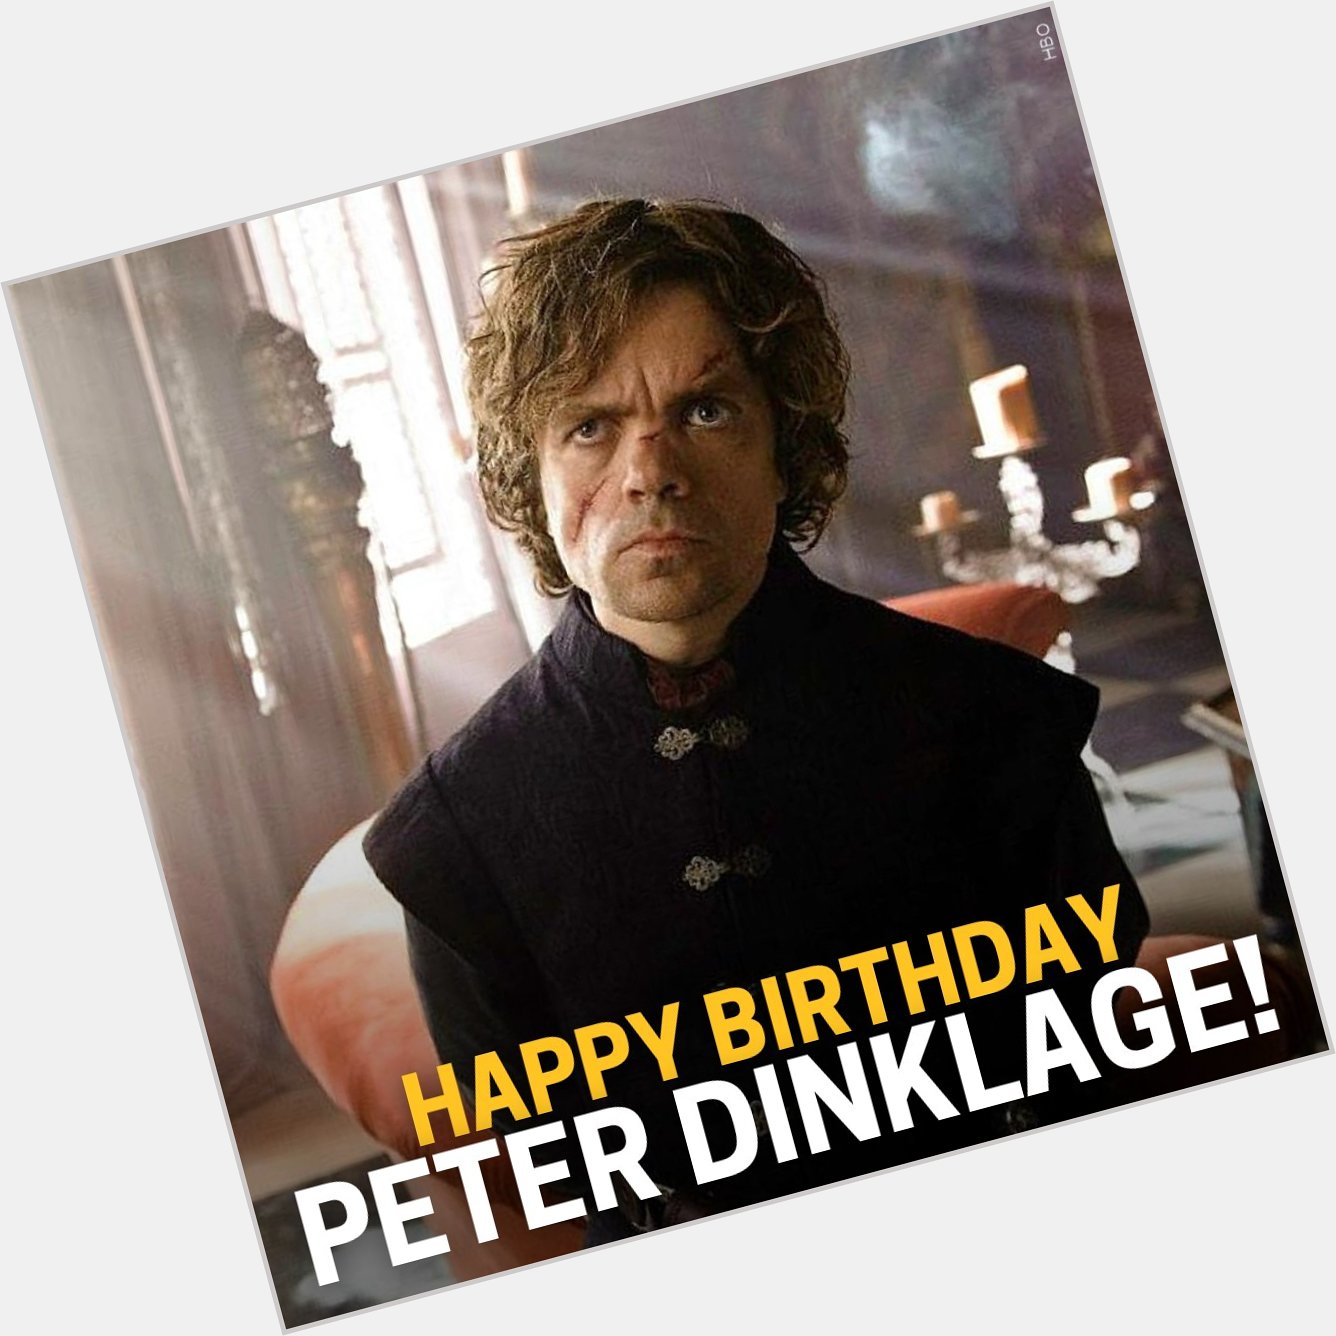 Happy birthday to Peter Dinklage aka Tyrion Lannister! 